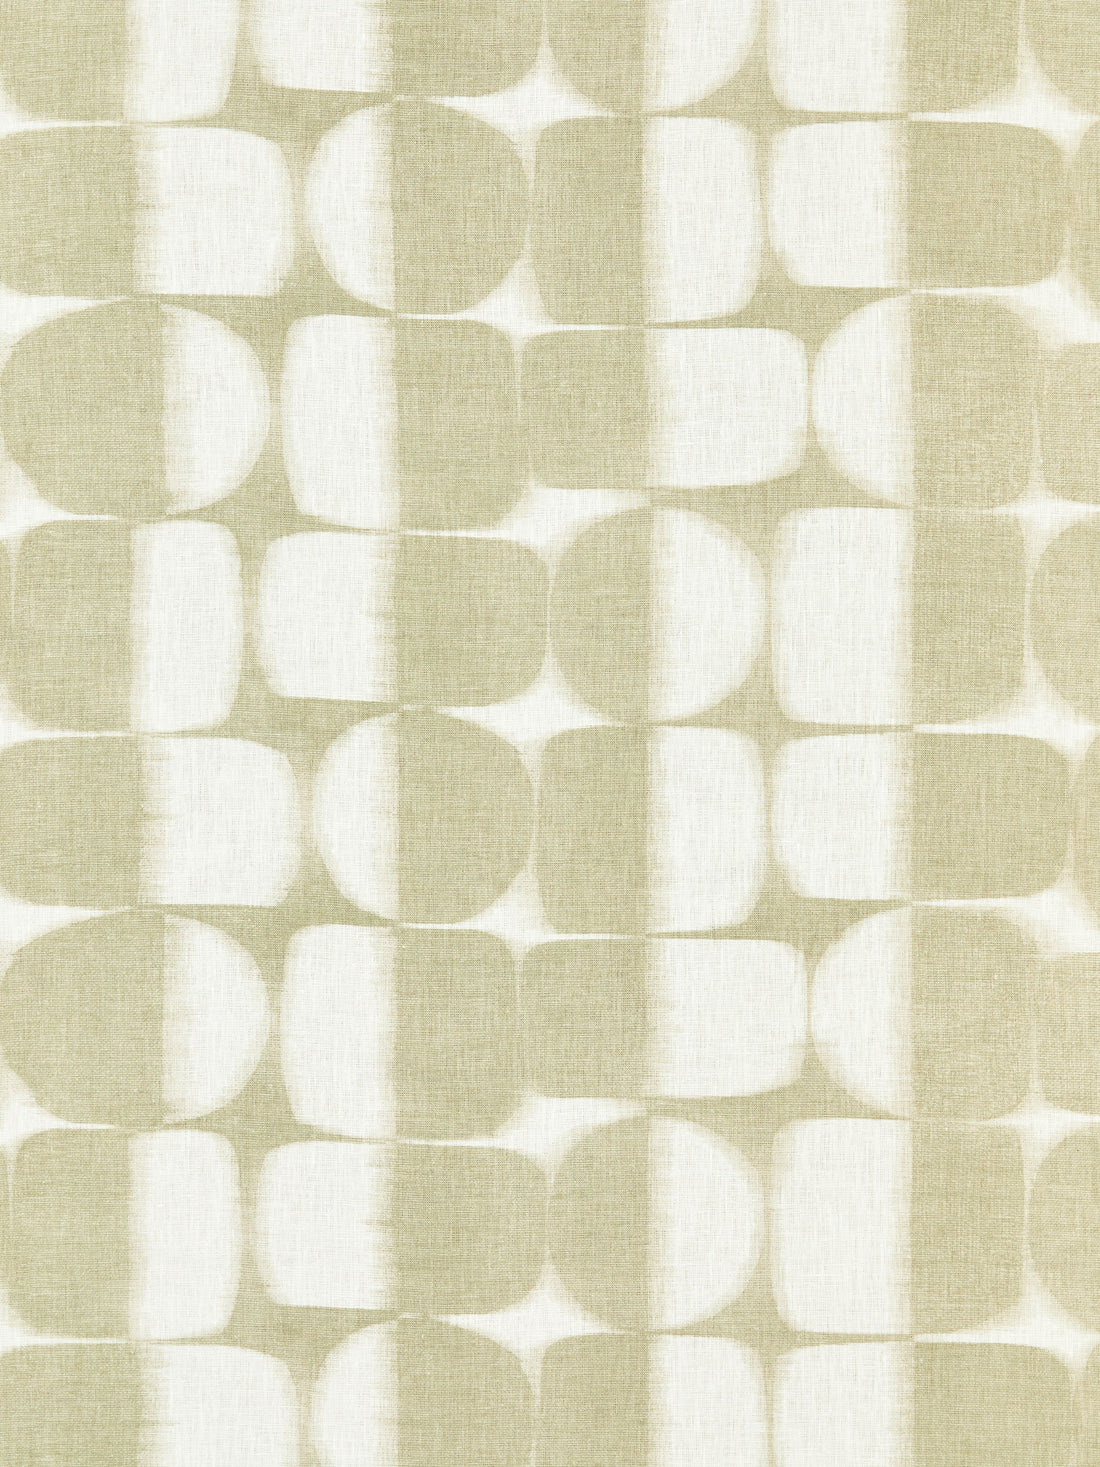 Rift Linen Print fabric in driftwood color - pattern number SC 000116636 - by Scalamandre in the Scalamandre Fabrics Book 1 collection